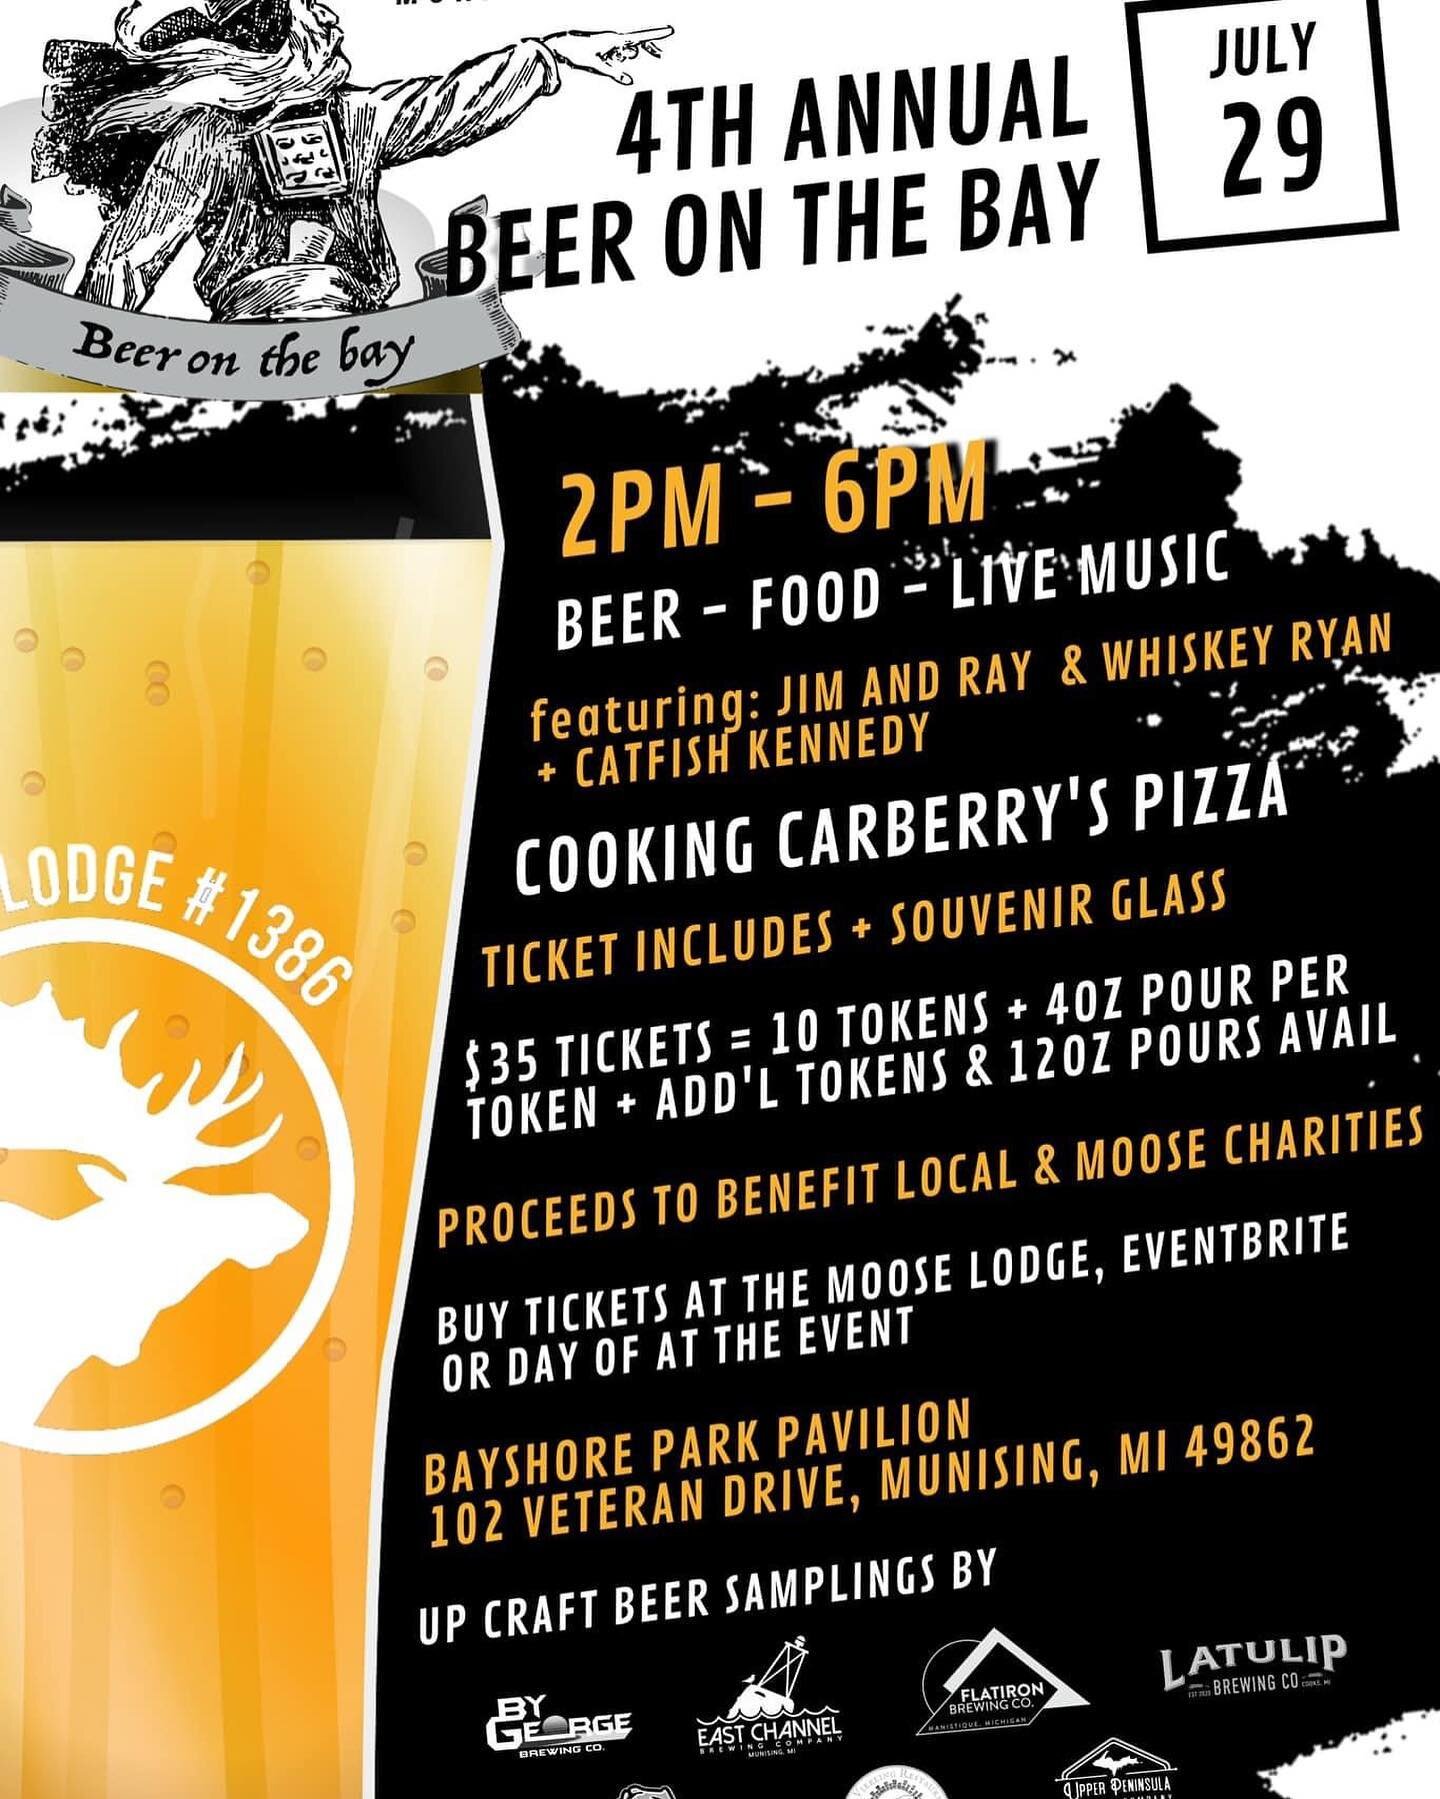 Make plans to attend Beer on the Bay this weekend!  See you there! #munising #yooperlife #beer